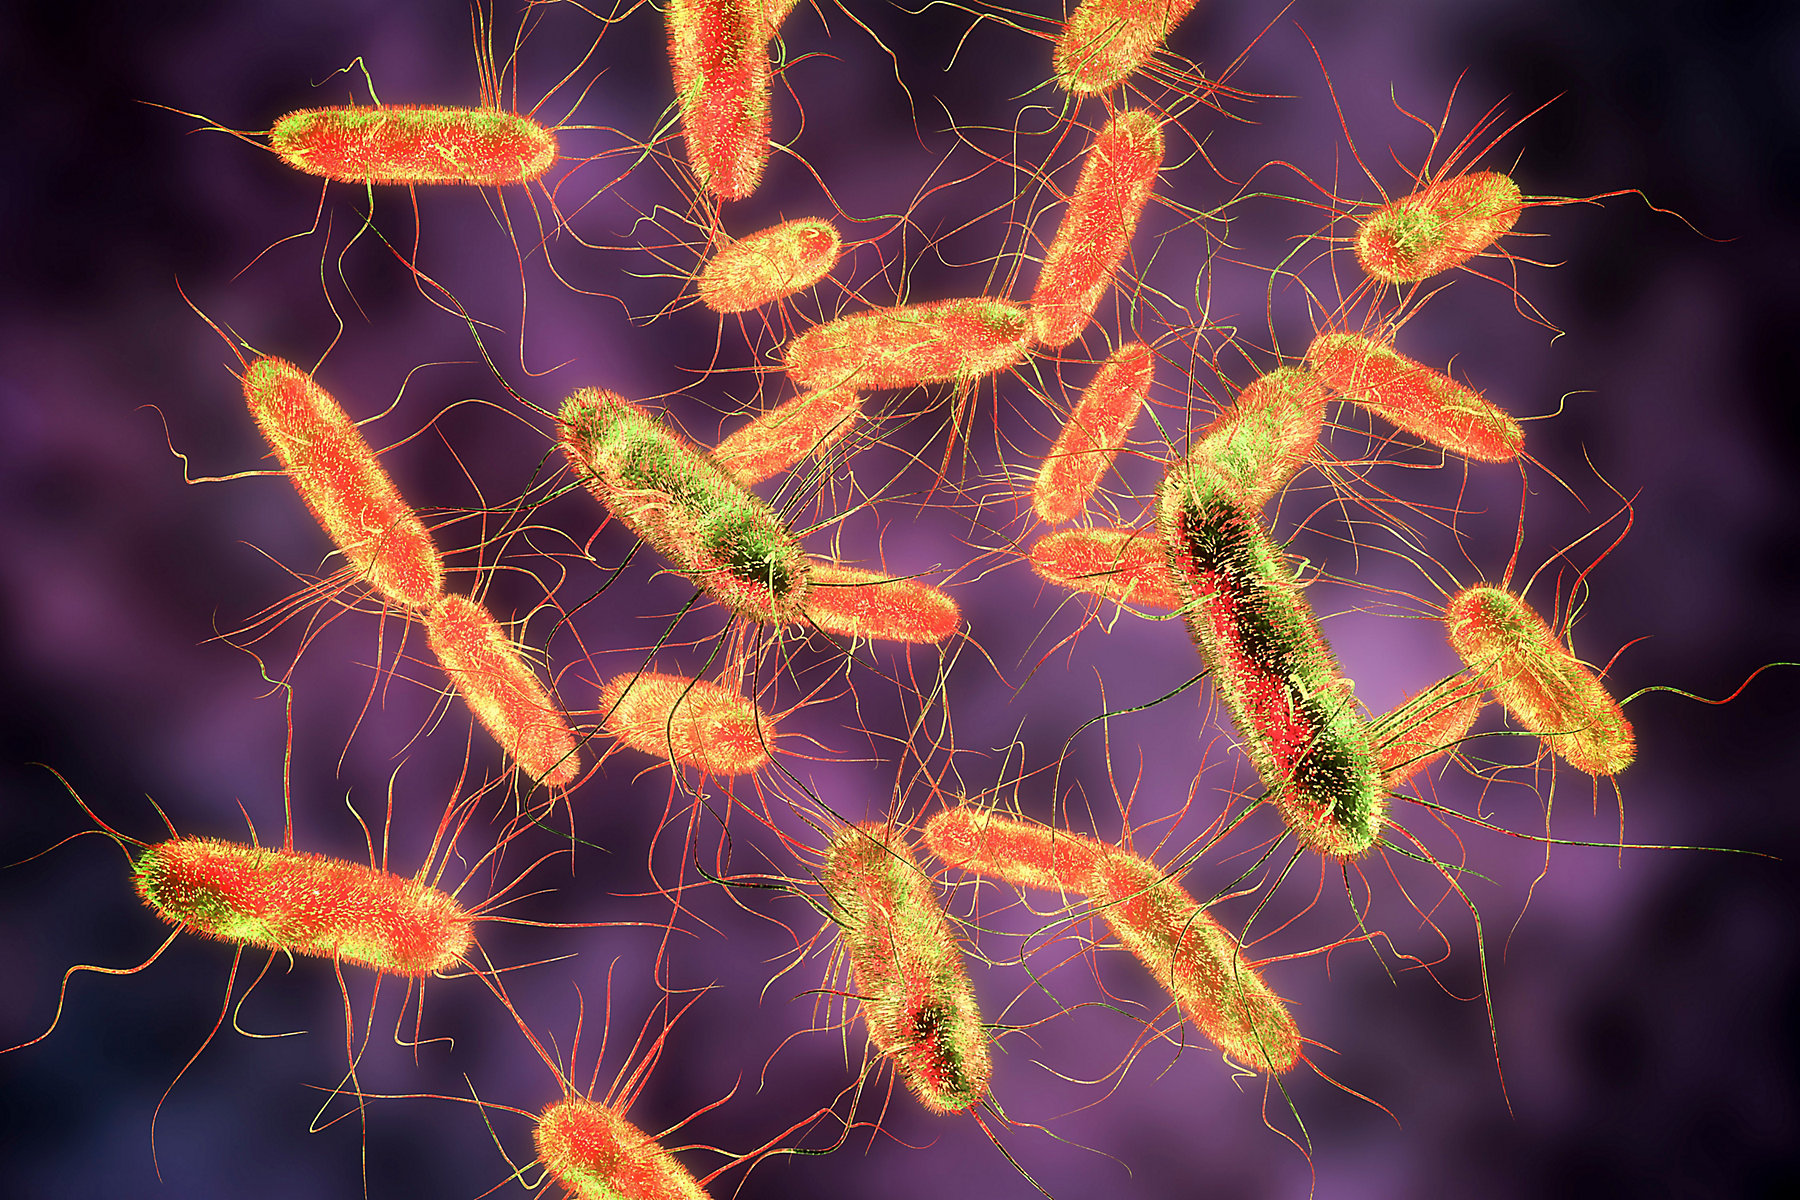 Salmonella bacteria. S. typhi, S. typhimurium and other Salmonella, Gram-negative rod-shaped bacteria, the causative agents of enteric typhus and food toxicoinfection salmonellosis, 3D illustration; Shutterstock ID 1030961158; BU: KA, KFT, KN, KI, KCT, KH, KTA: KA; Region: NA, EMEA, AP, SA, RU, IN, Sub SA: AP; Use: Marketing, Sales PPT, Website, Other: Marketing